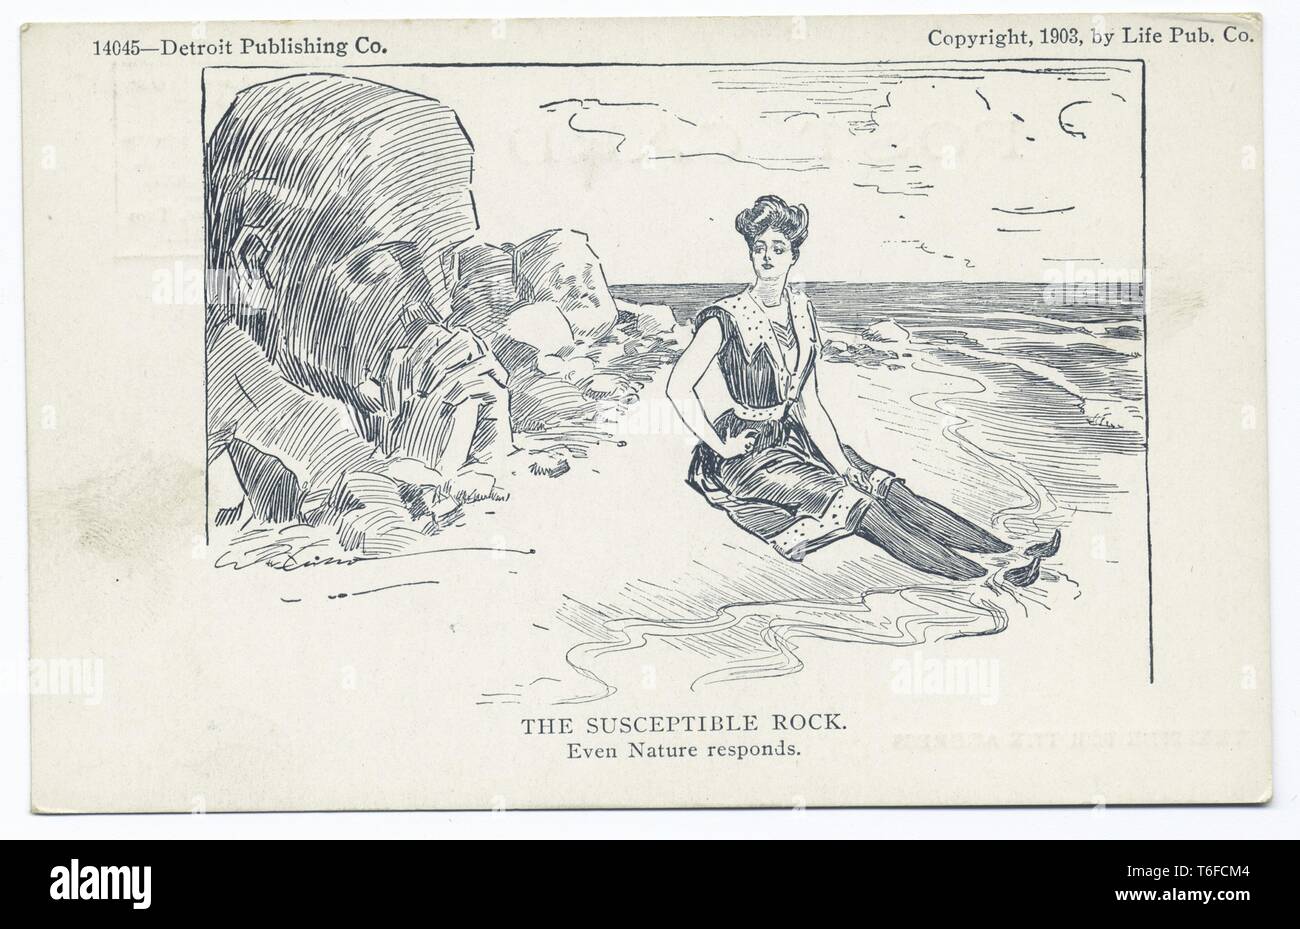 Detroit Publishing Company vintage postcard reproduction of the 'The Susceptible Rock', Life Cartoons, the woman sitting on the beach, 1903. From the New York Public Library. () Stock Photo